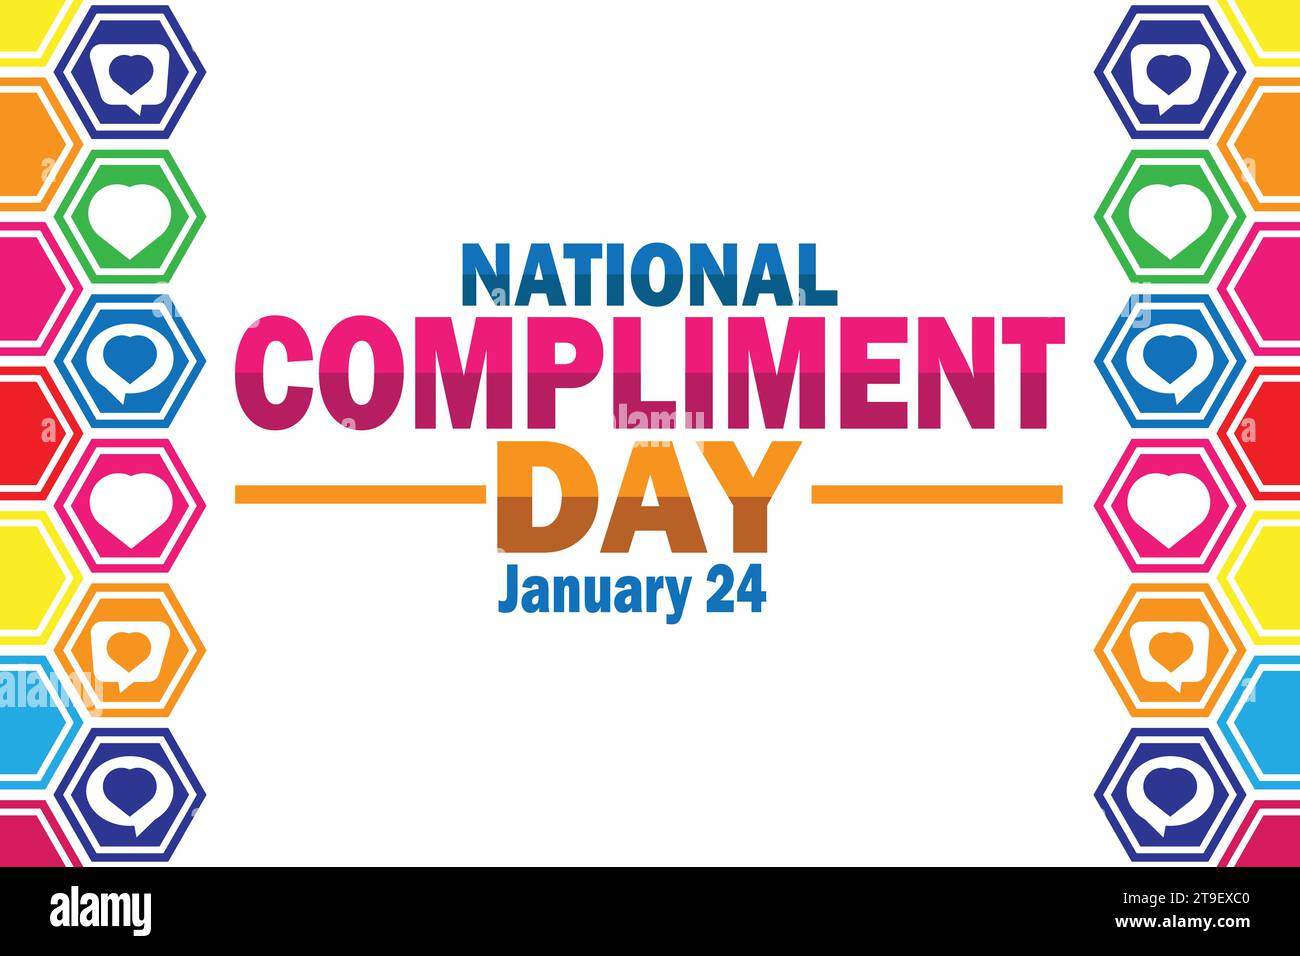 National Compliment Day. January 24. Holiday concept. Template for background, banner, card, poster with text inscription. Vector illustration Stock Vector